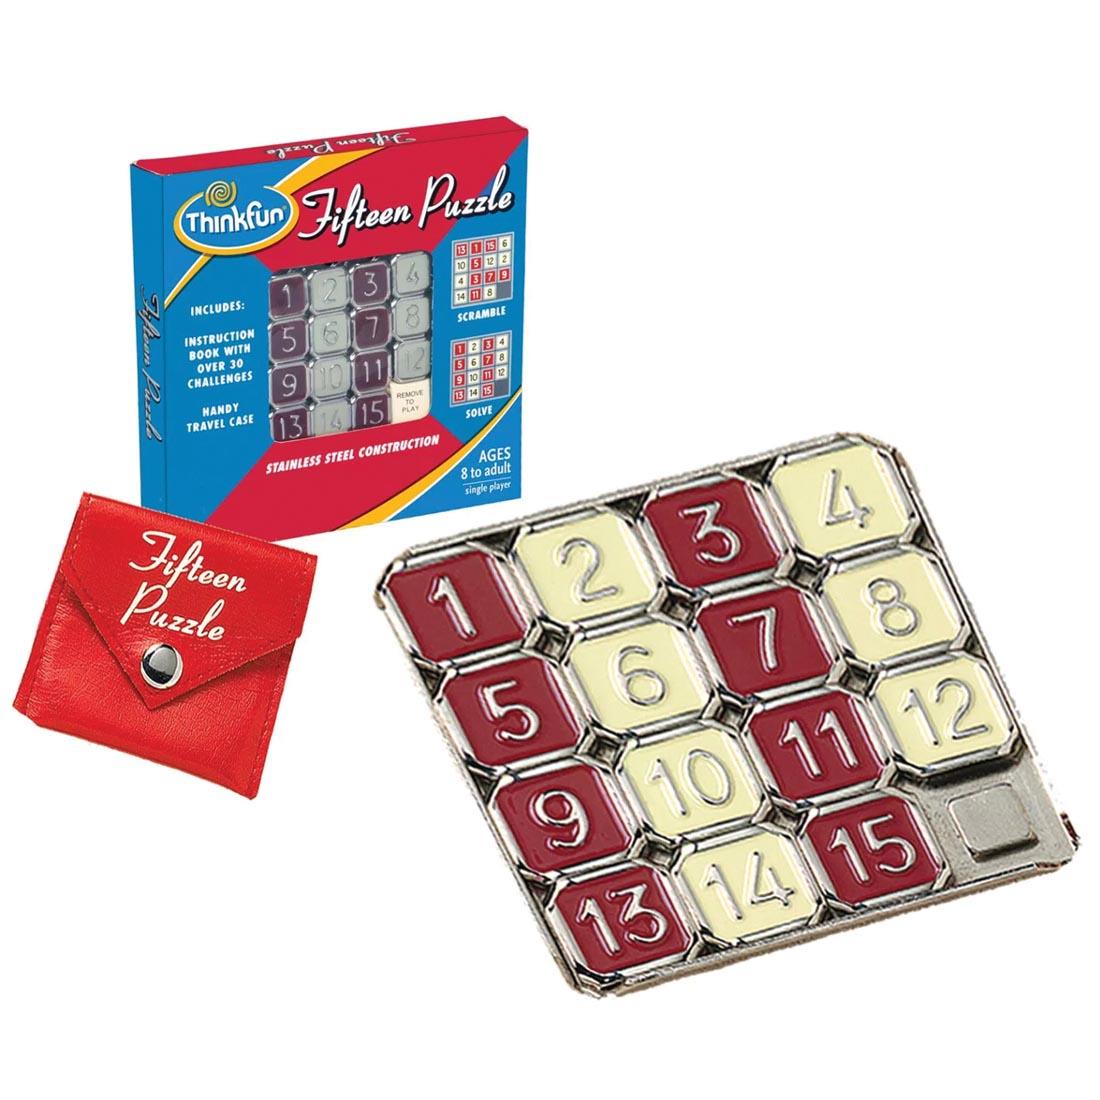 Thinkfun Fifteen Puzzle shown both in and out of package